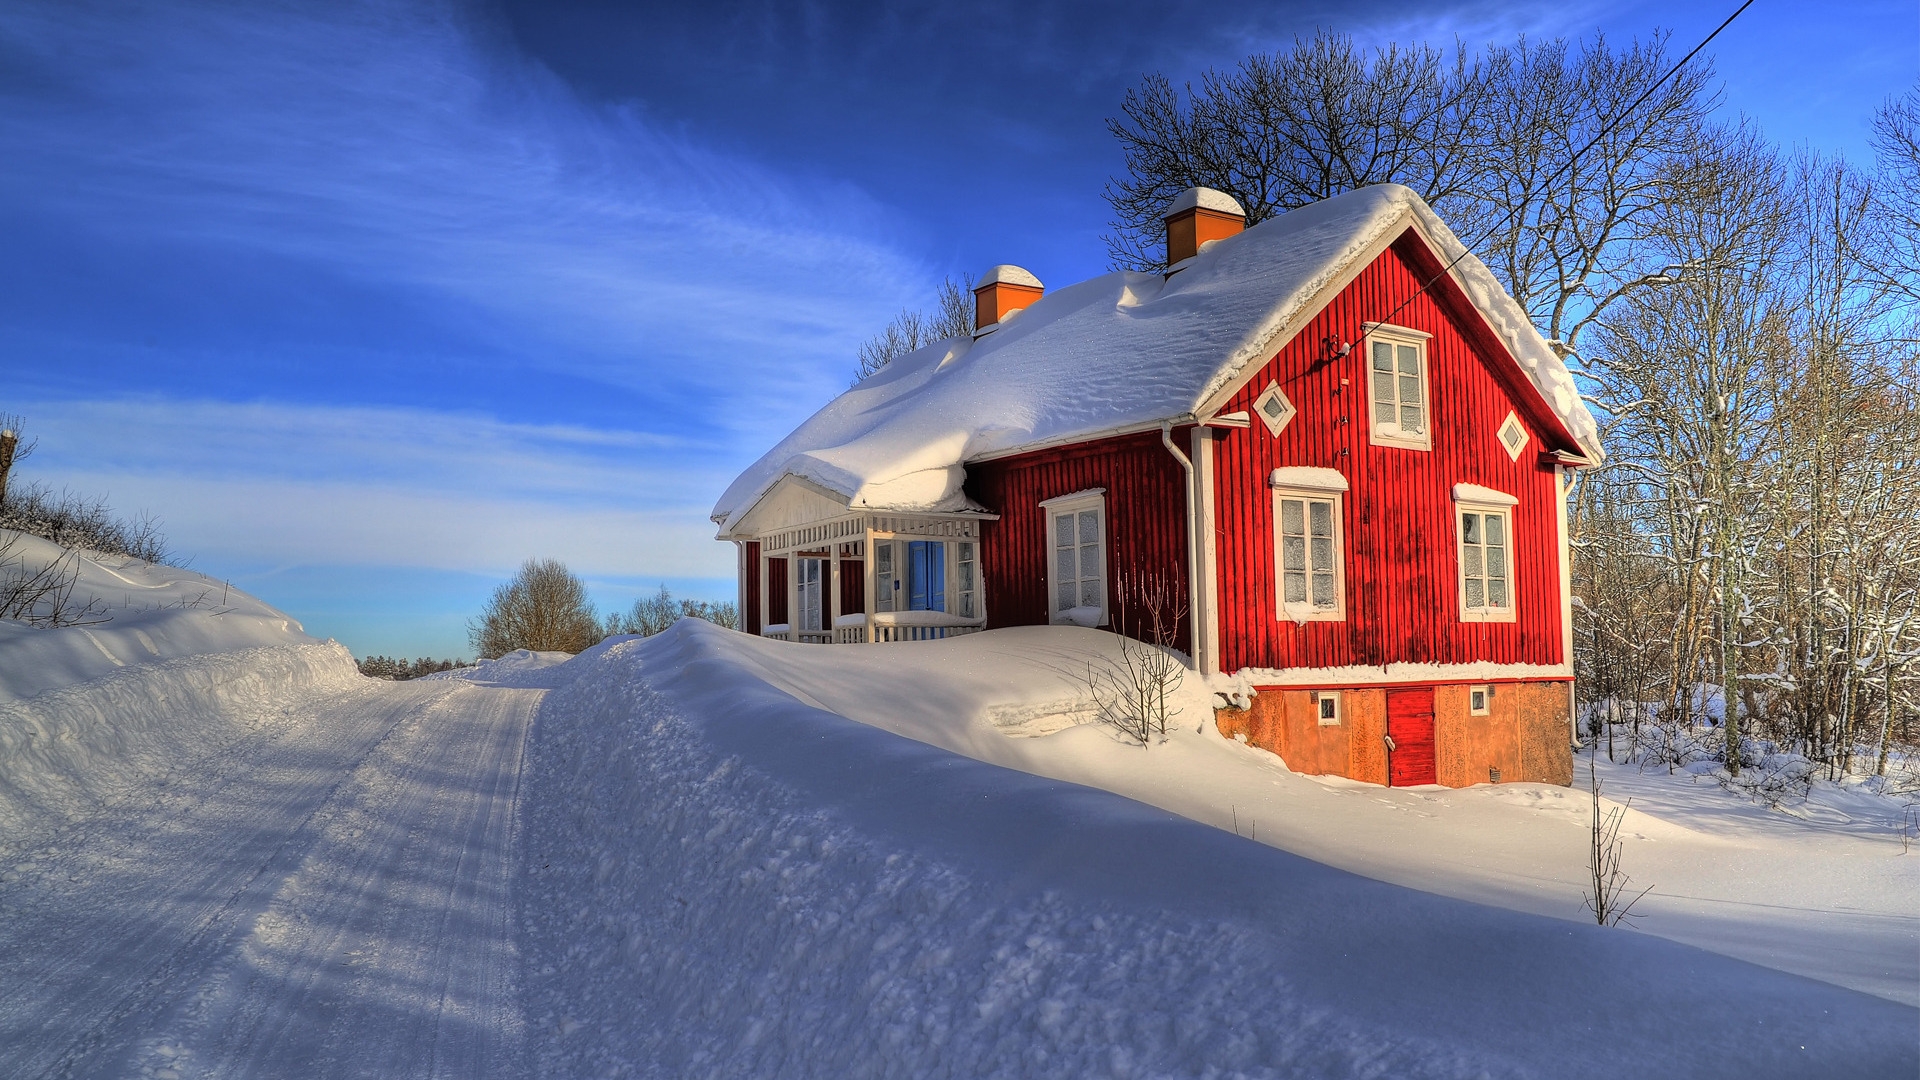 House Between Snow for 1920 x 1080 HDTV 1080p resolution